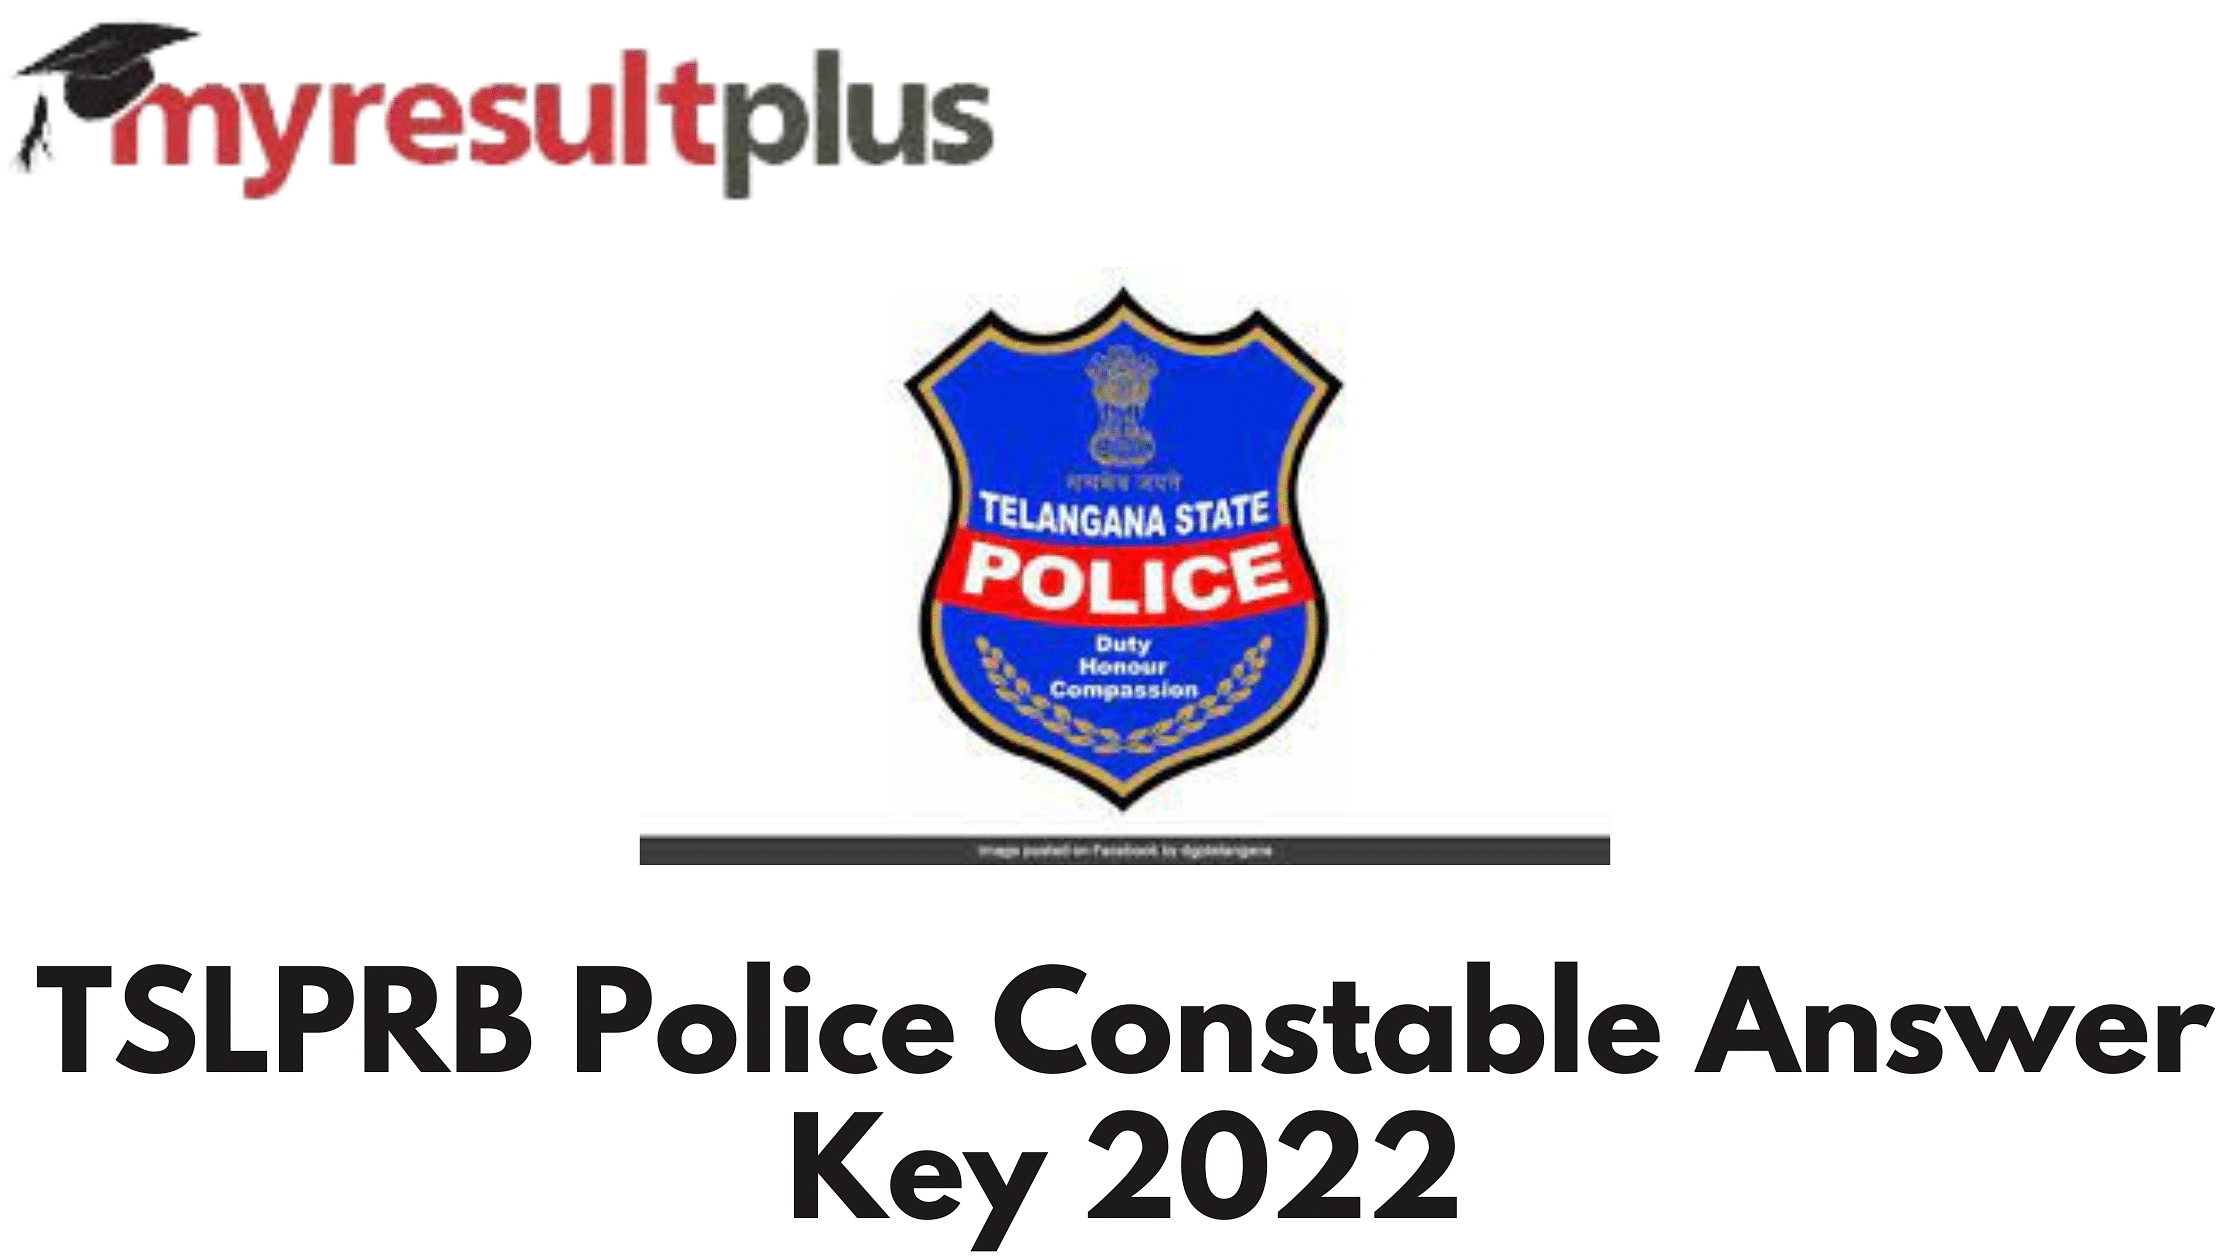 TS Police Constable Answer Key 2022 Available for Download, Direct Link Here